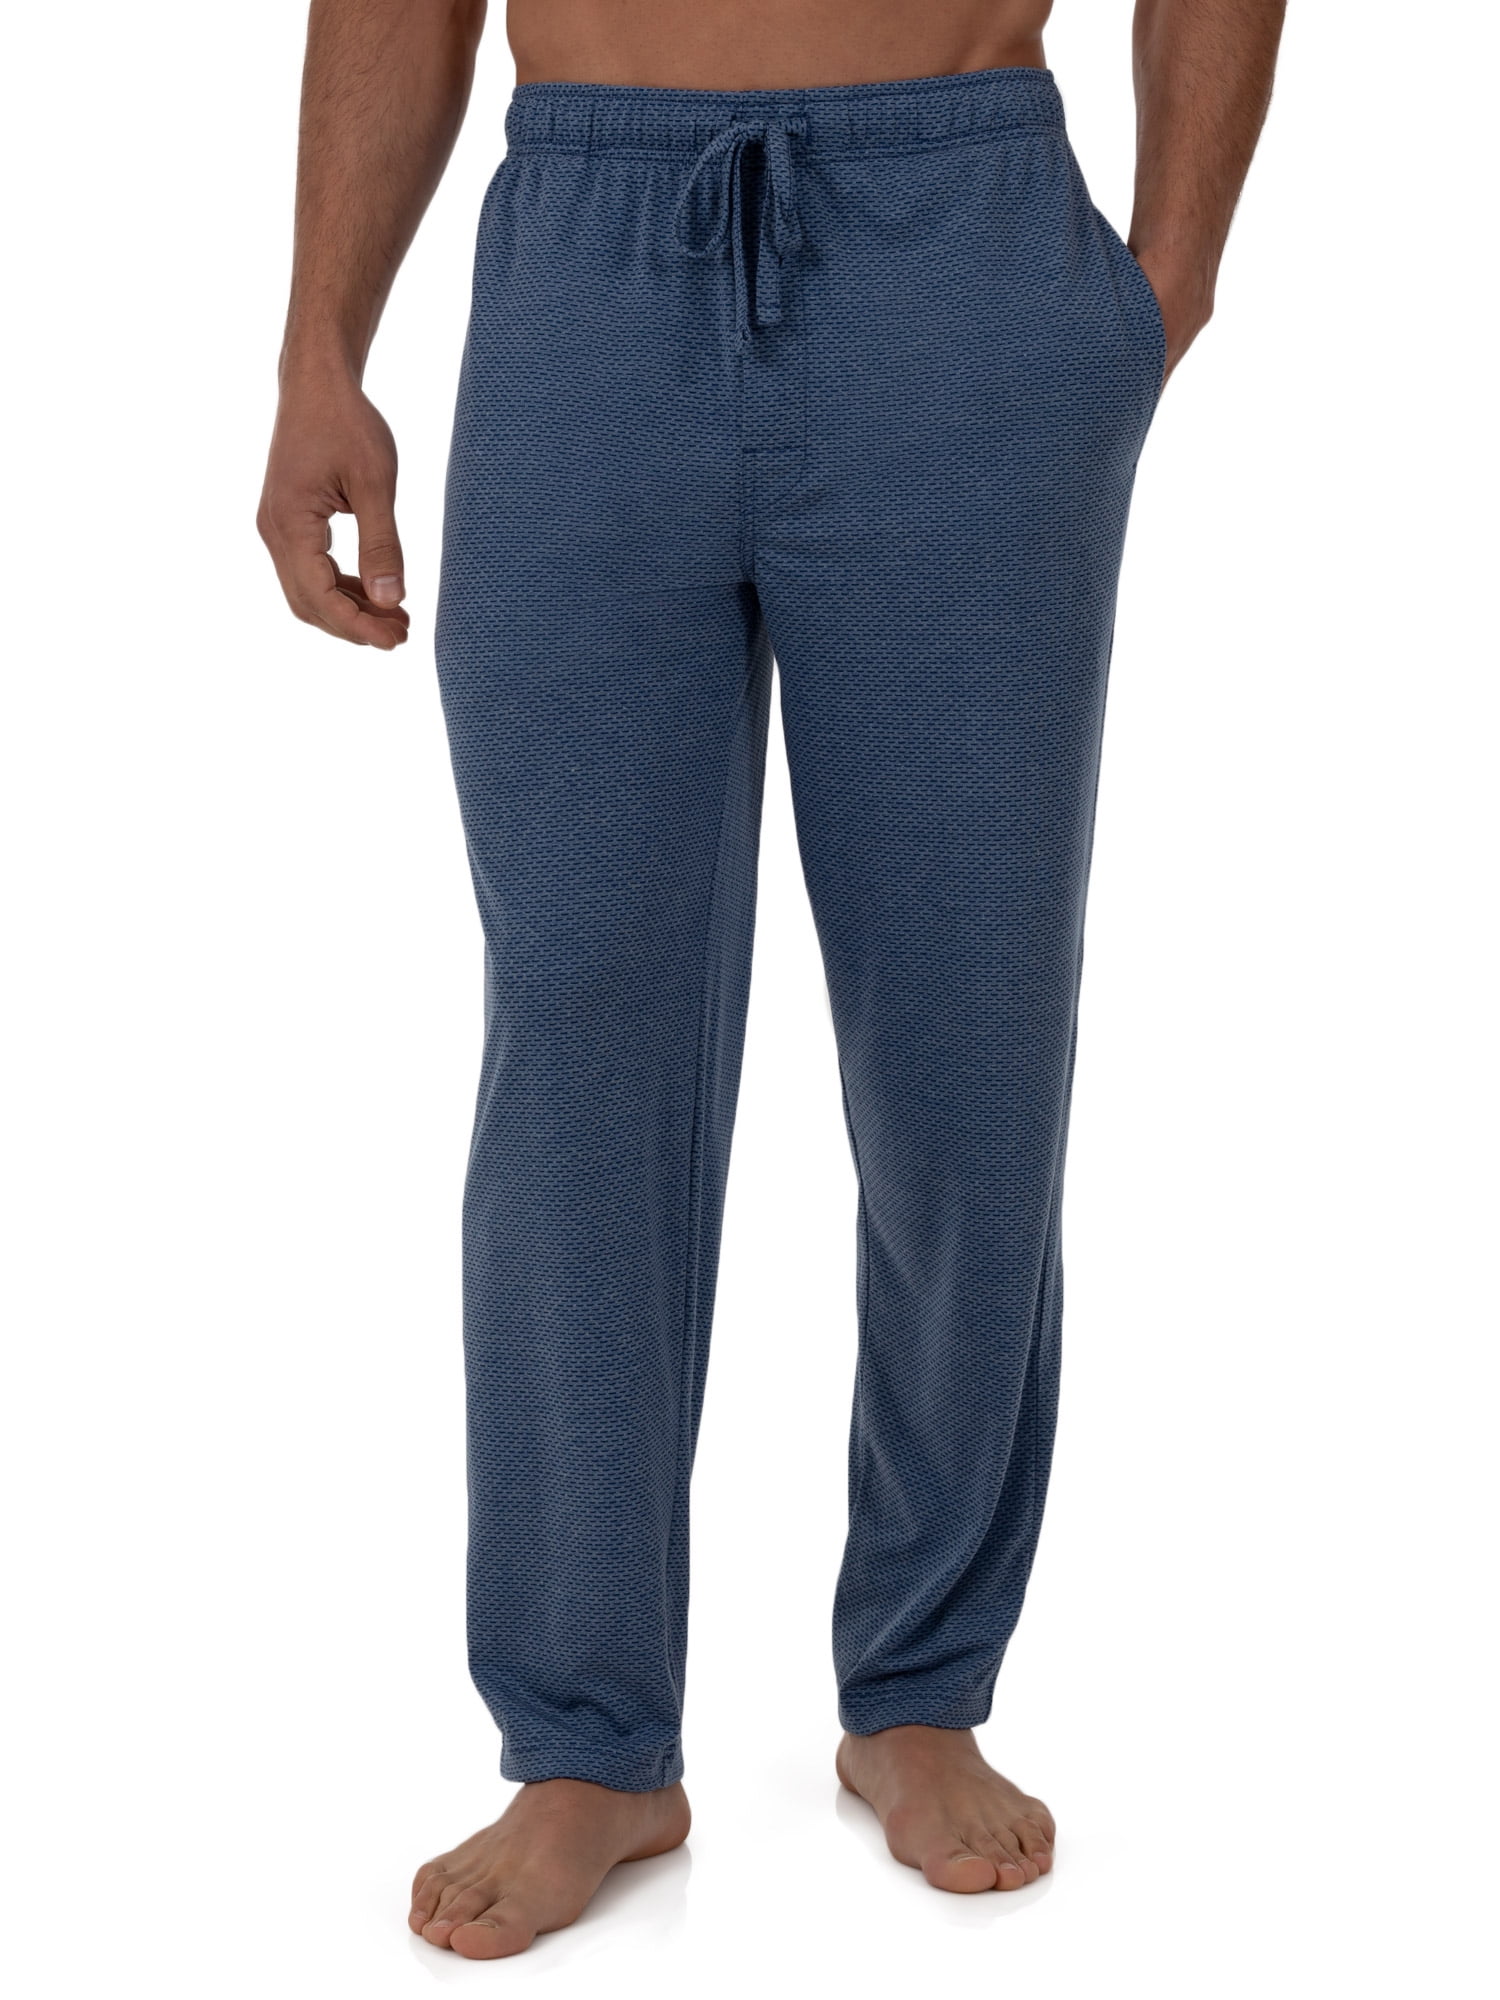 Fruit of the Loom Men’s Lounge Pants Jersey Sleep Pajama Pant with Fly & Pockets 